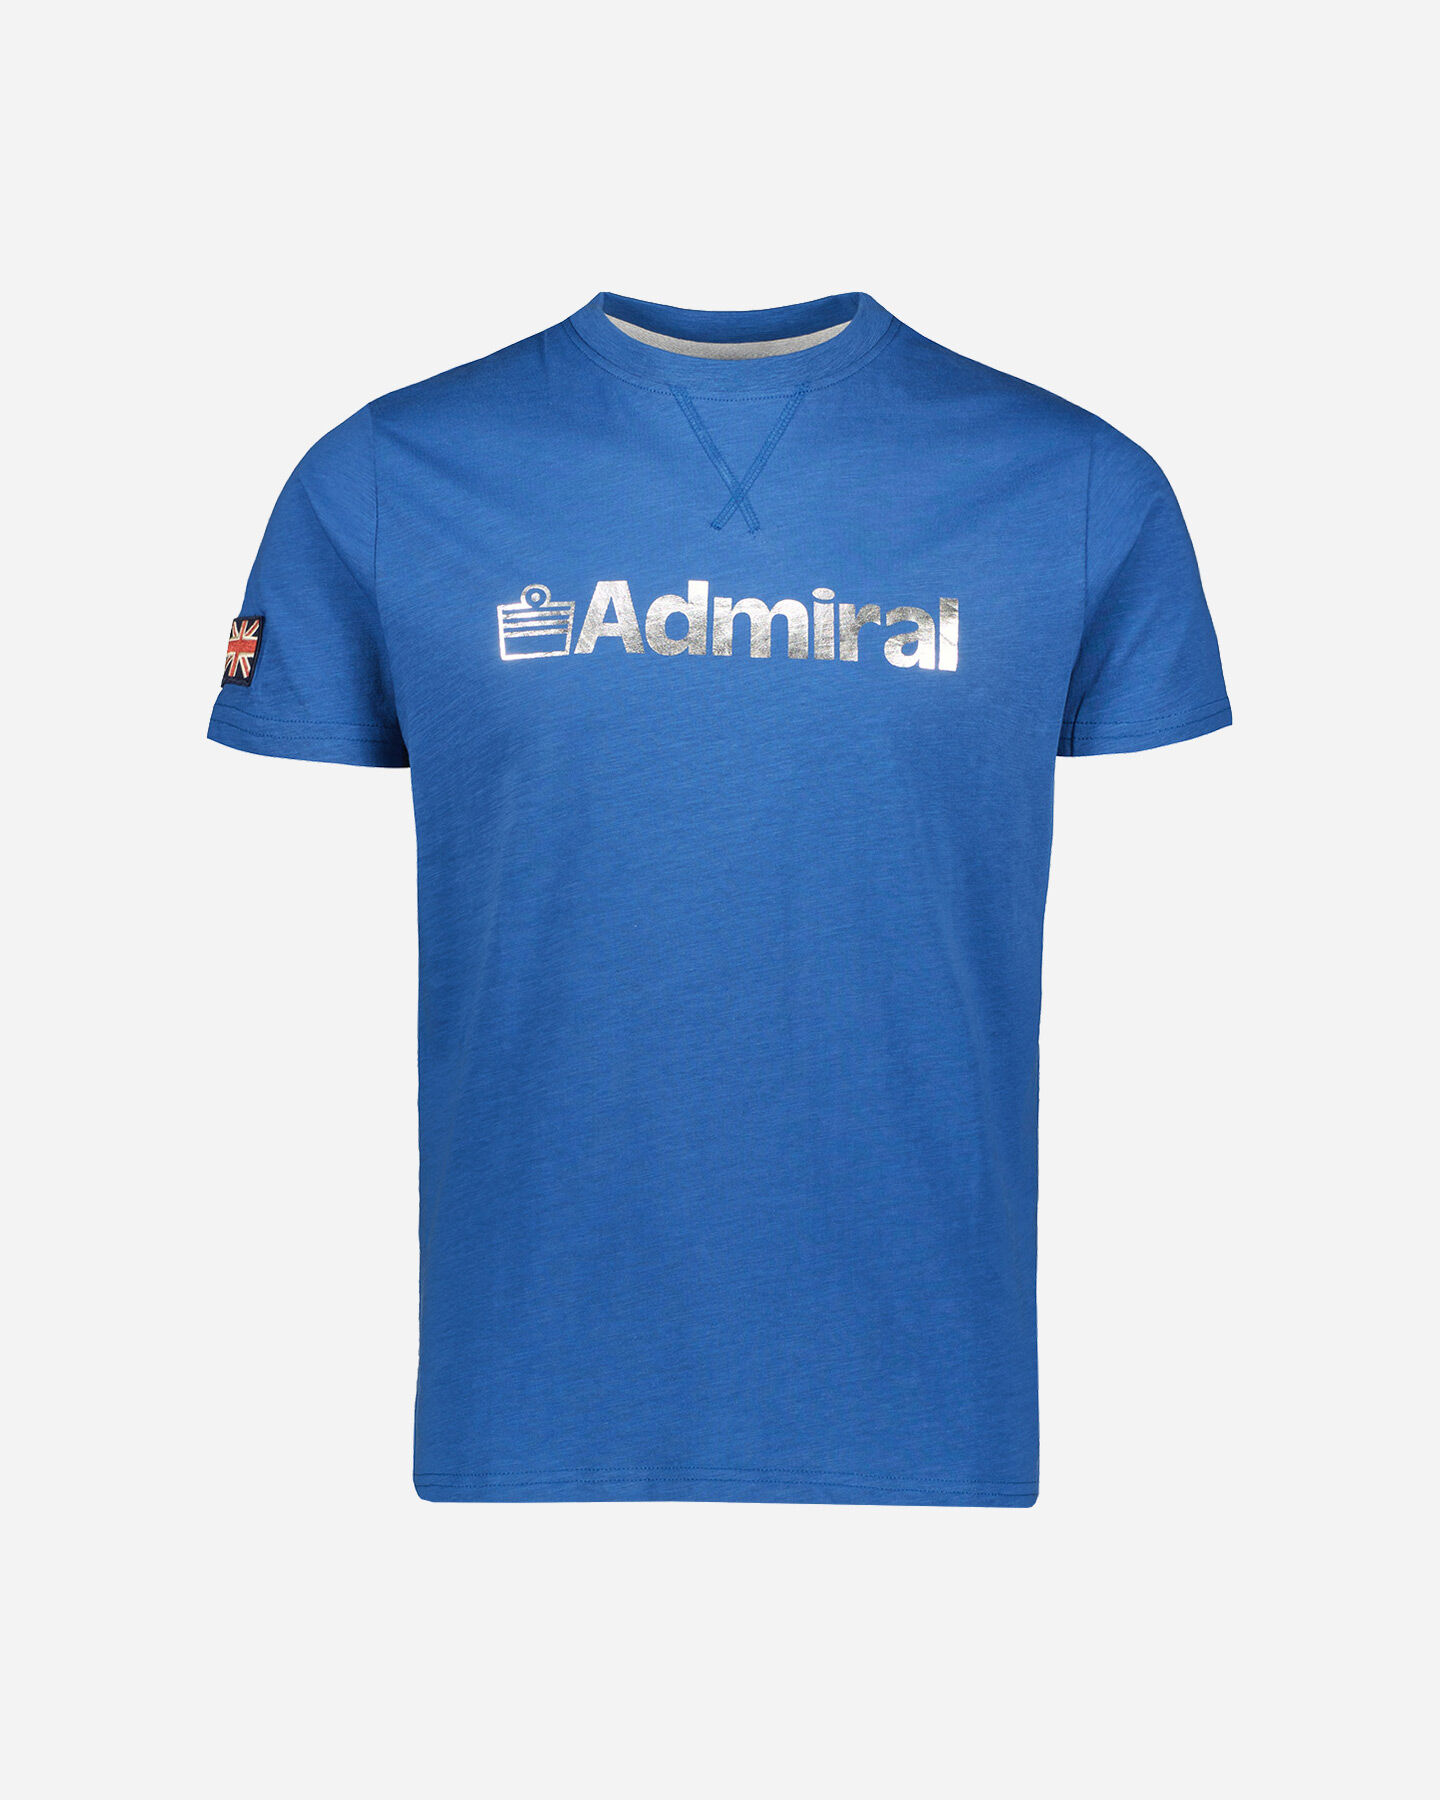  T-Shirt ADMIRAL PRINTED M S4136513|EI123|S scatto 0